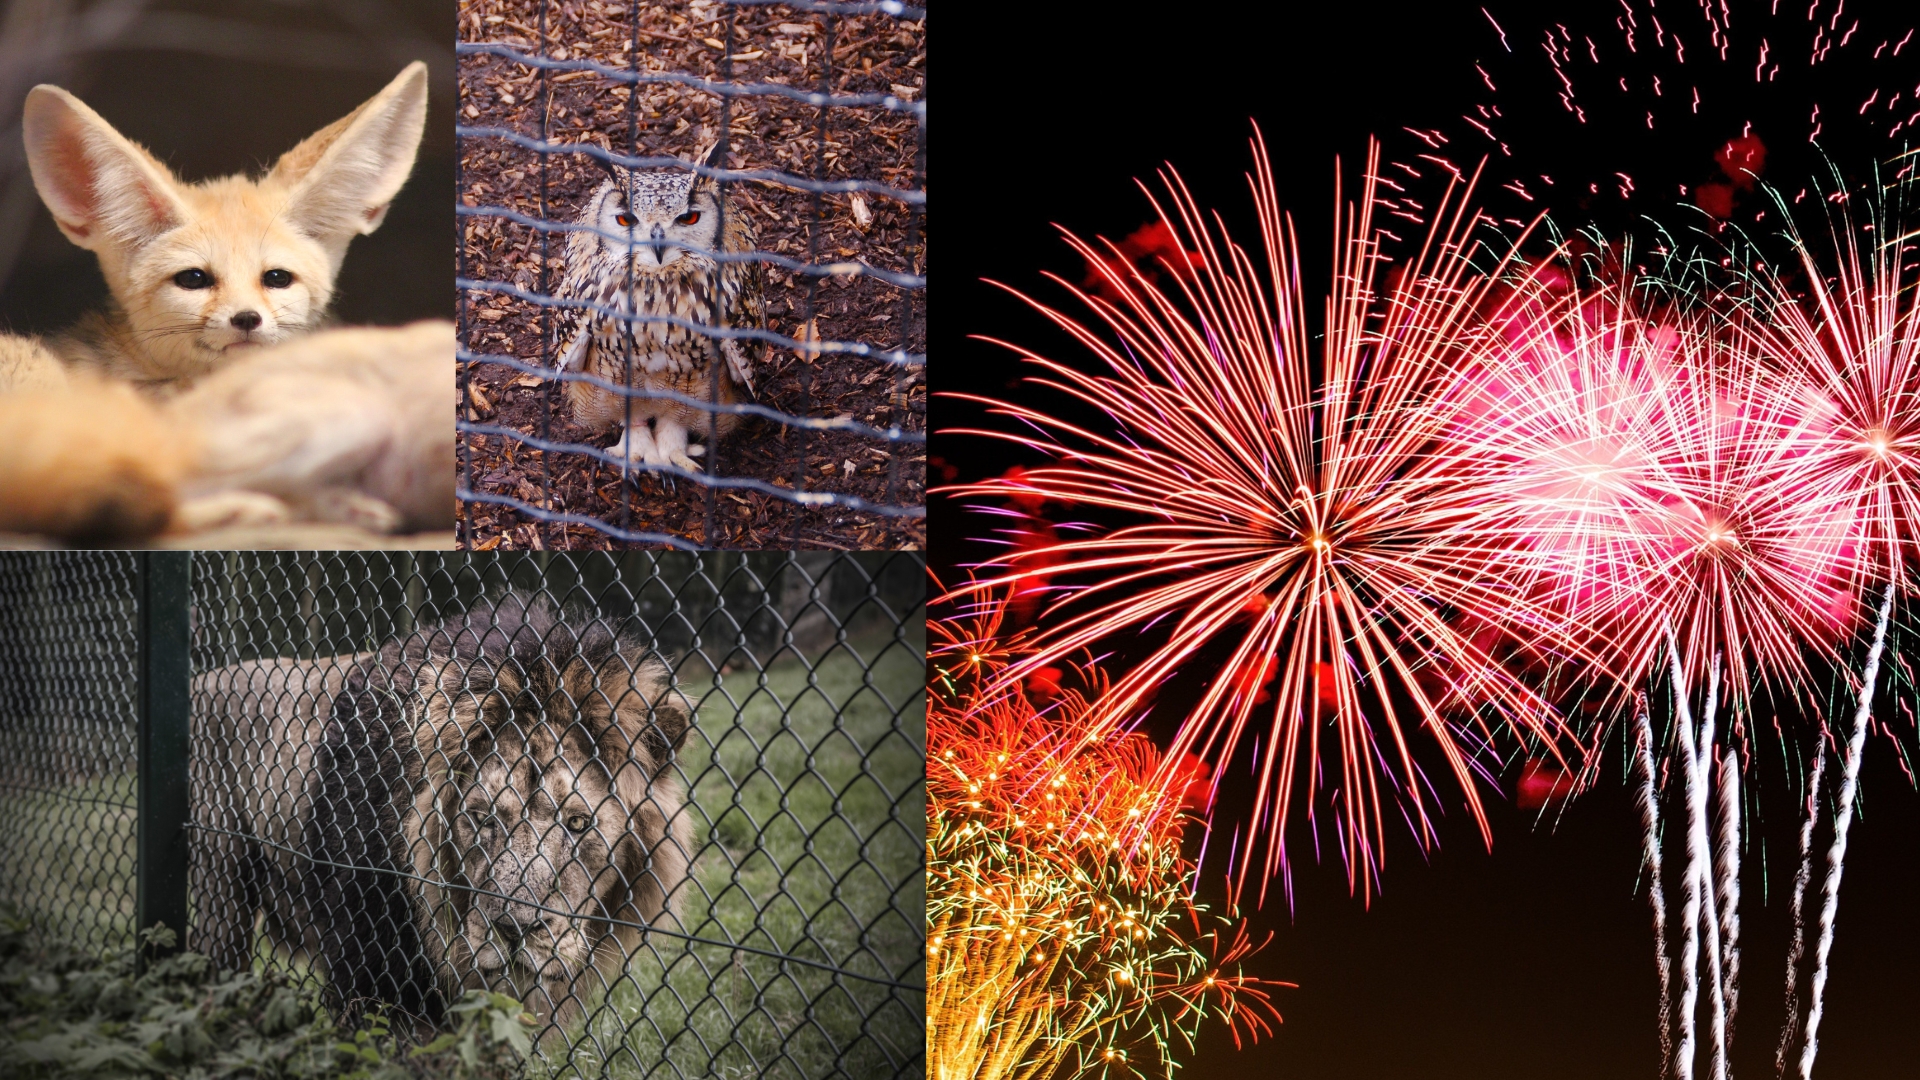 A montage of photographs showing fireworks and animals in captivity